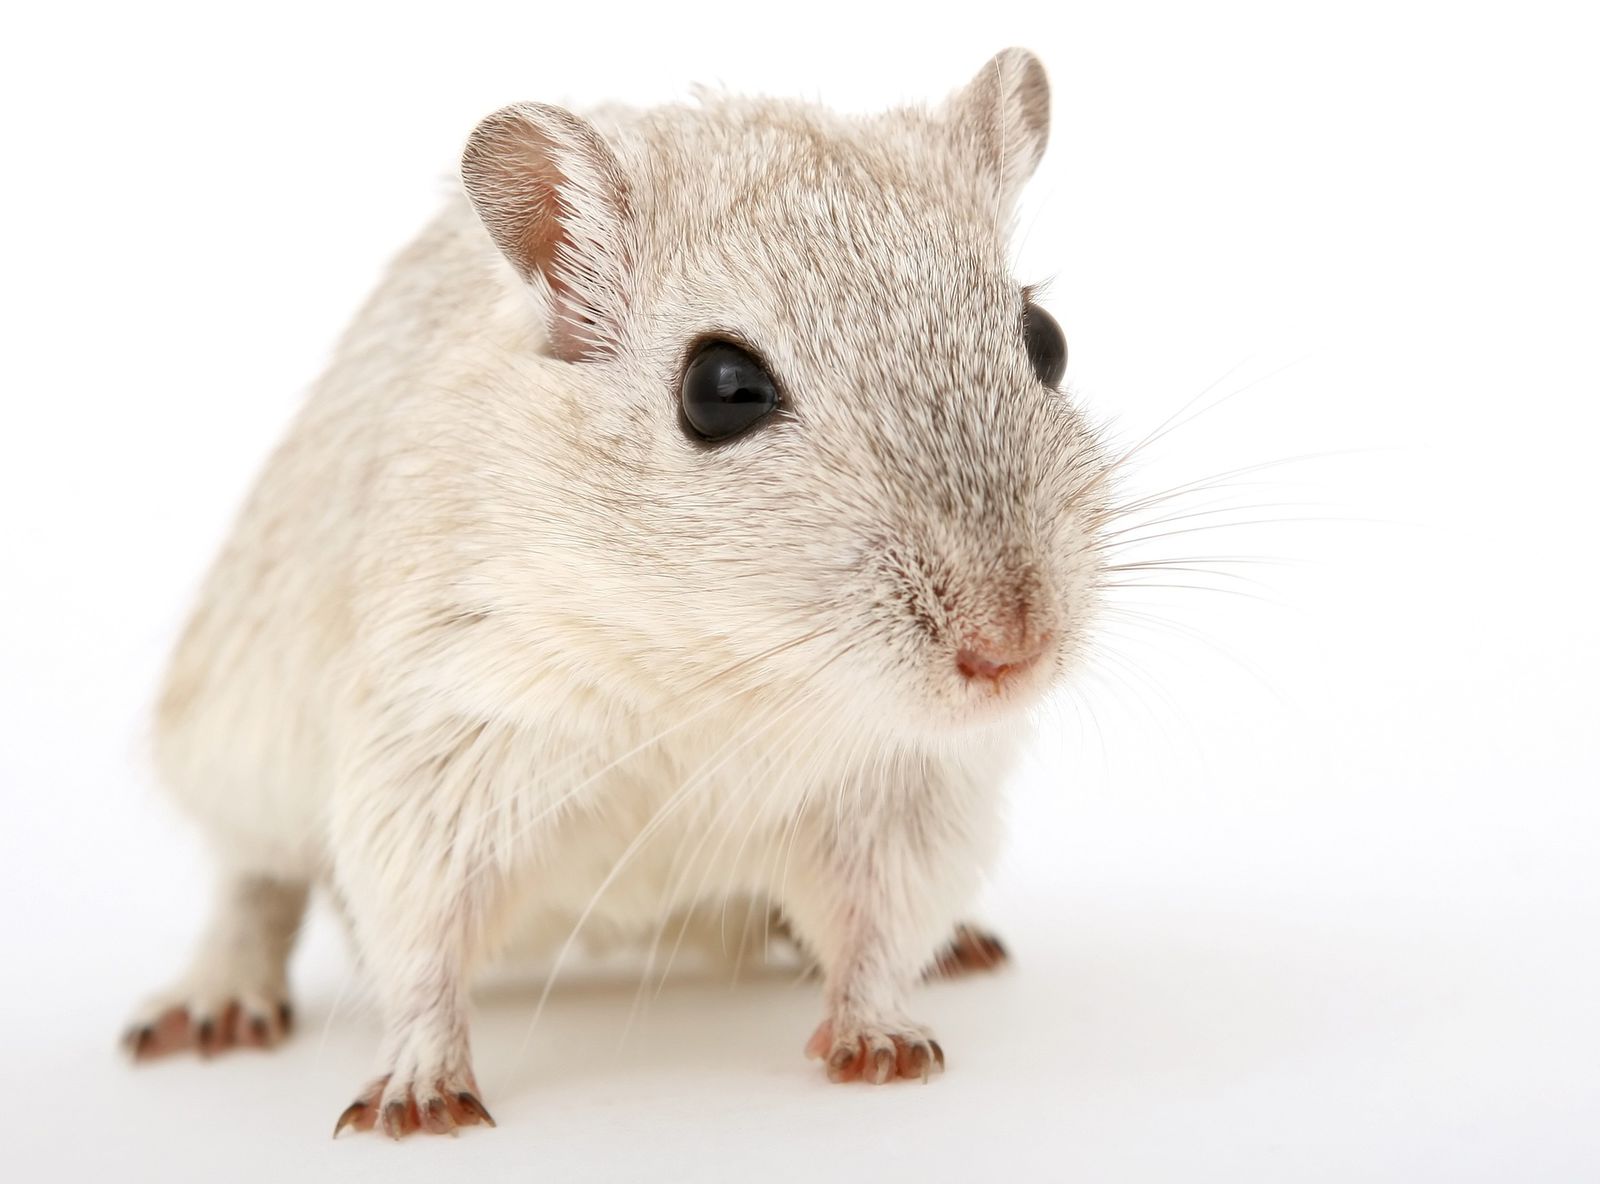 Does car insurance cover mice damage?